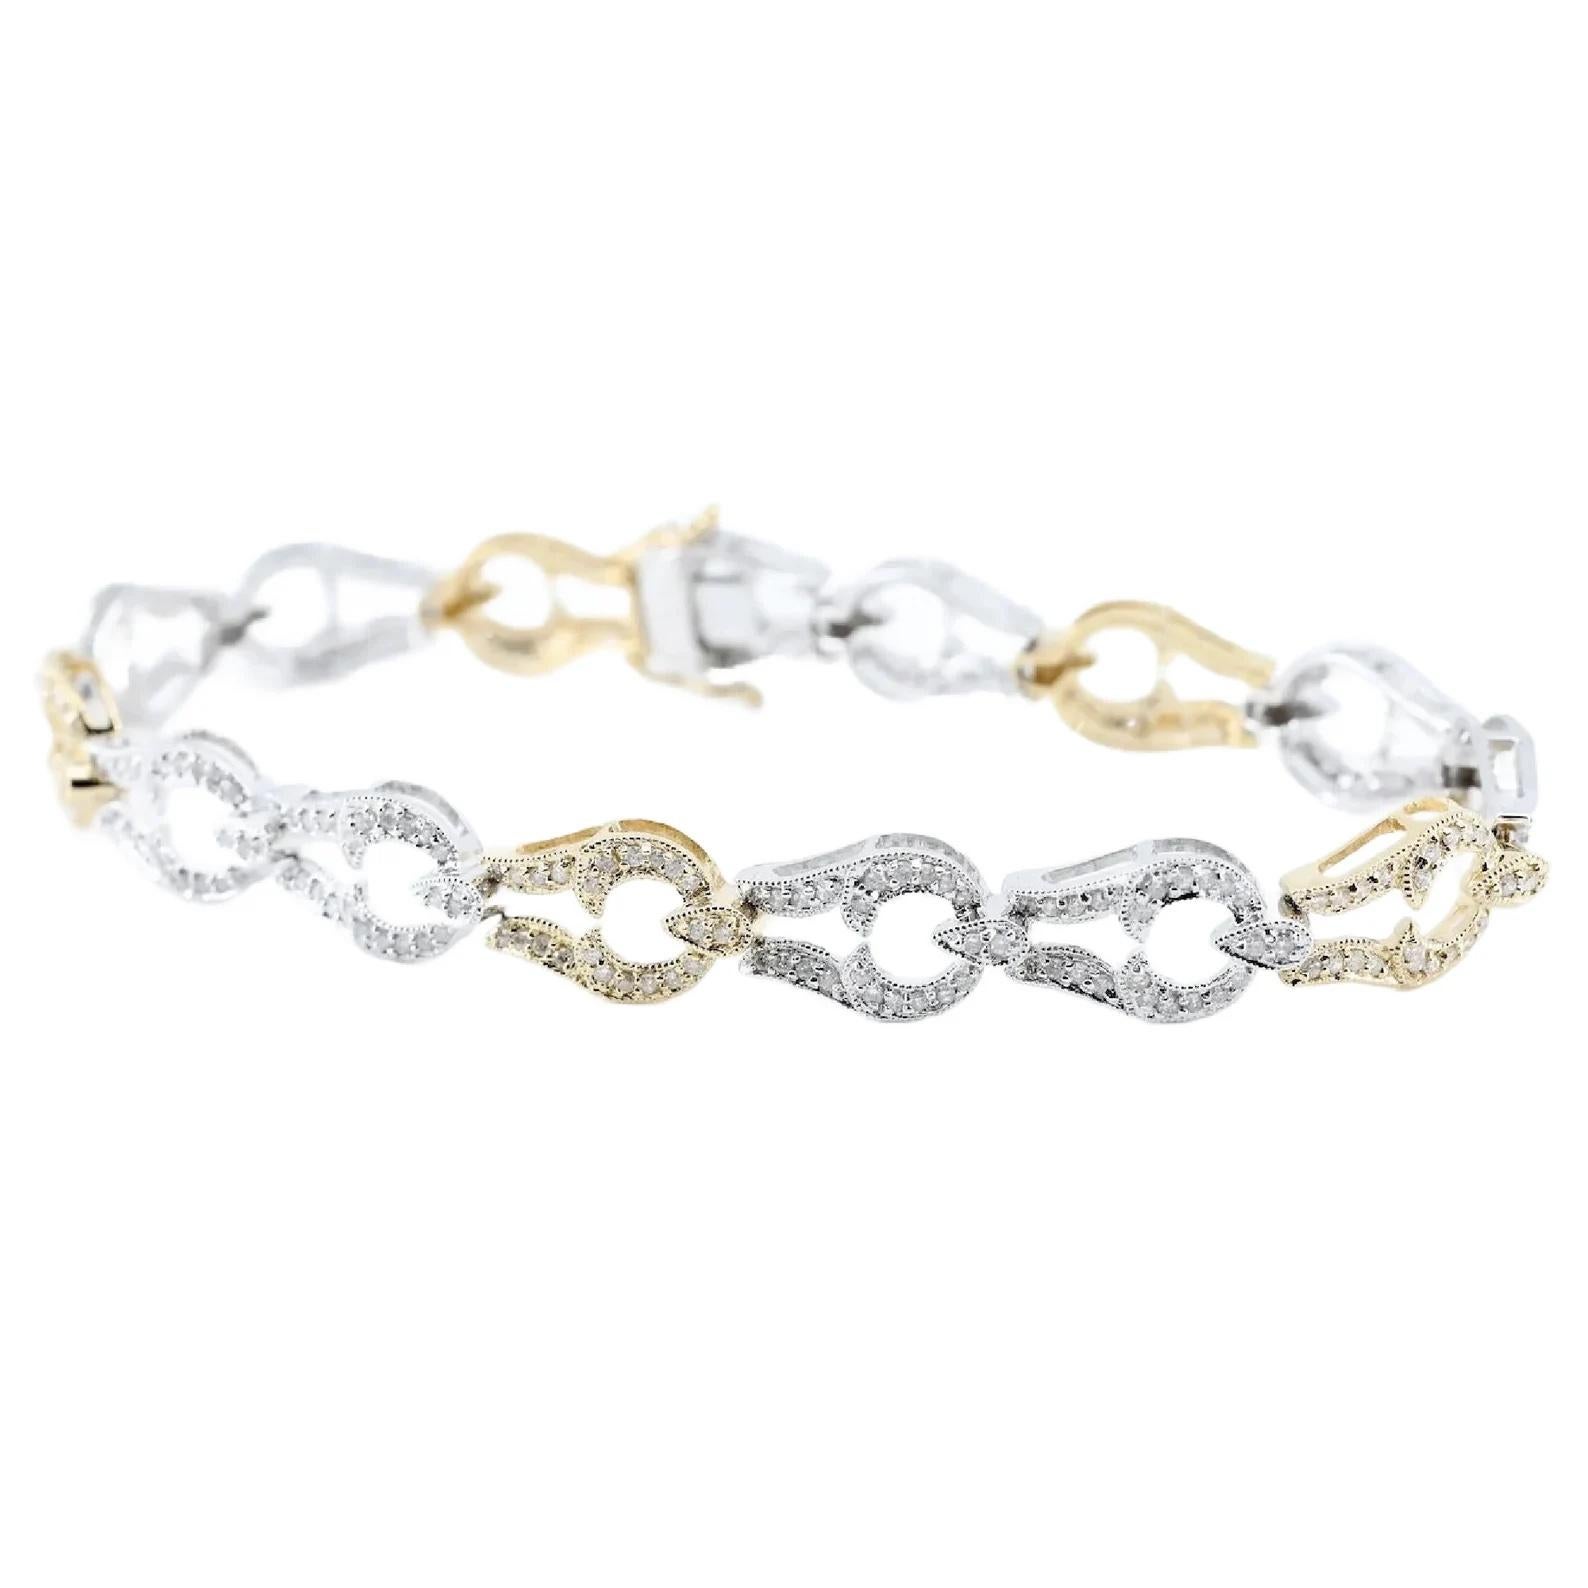 A pave set fancy yellow diamond and white diamond bracelet in two tone 18 karat white, and yellow gold.

Set with 1.50ctw of natural fancy yellow, and natural G/H color diamonds; accented by miligrain detailing throughout.

Tested, and hallmarked as